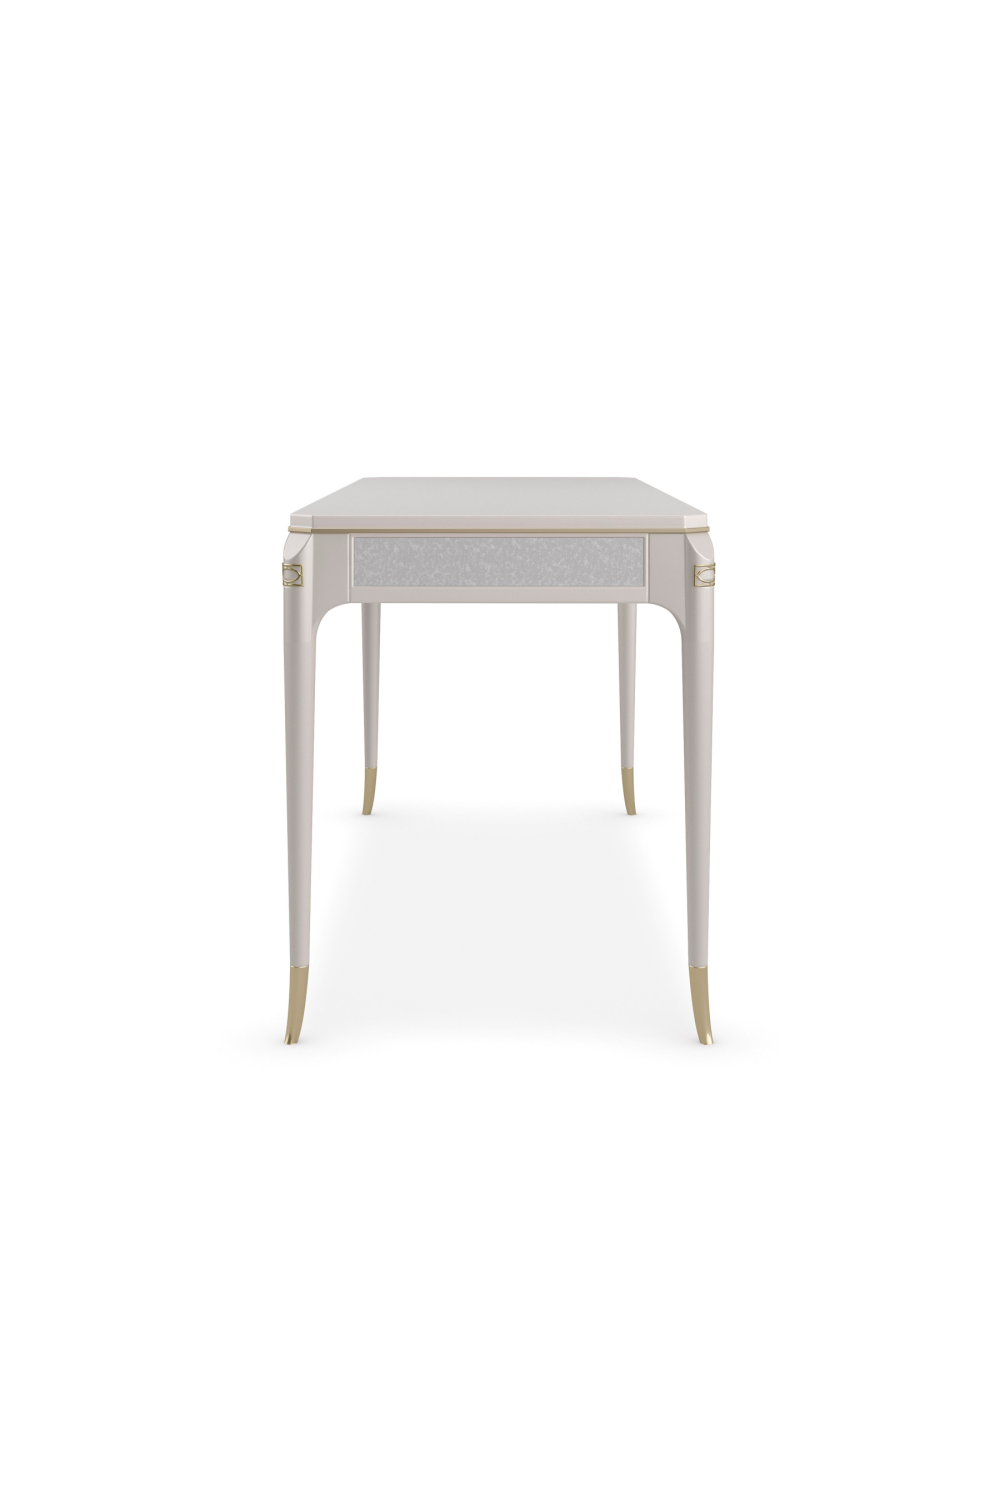 White Modern Desk | Caracole Sincerely Yours | Oroa.com